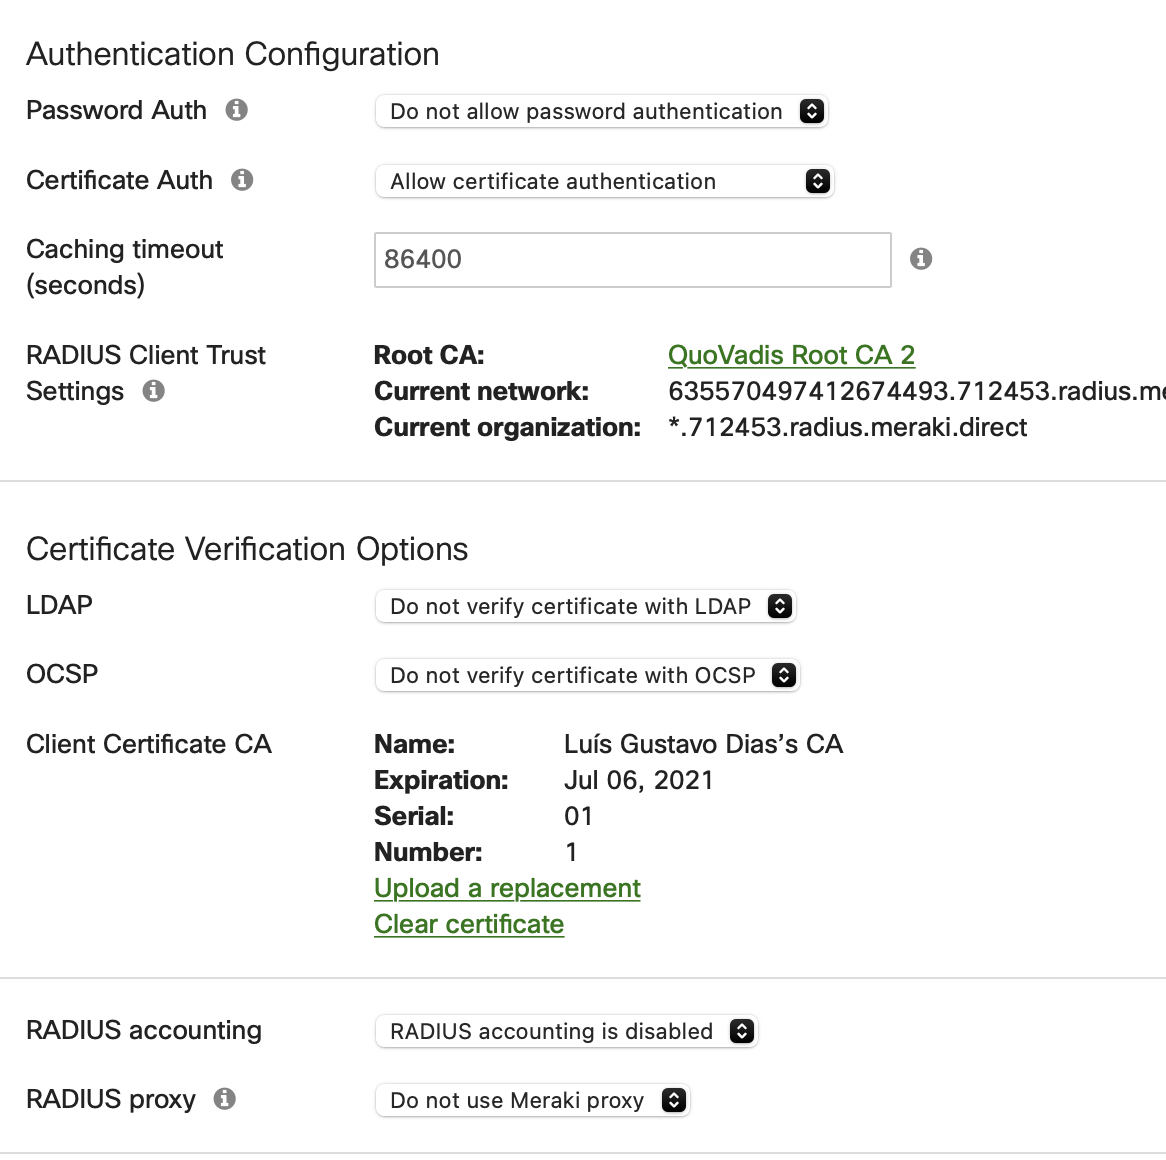 Enterprise with Local Auth how to generate Client Certificate CA